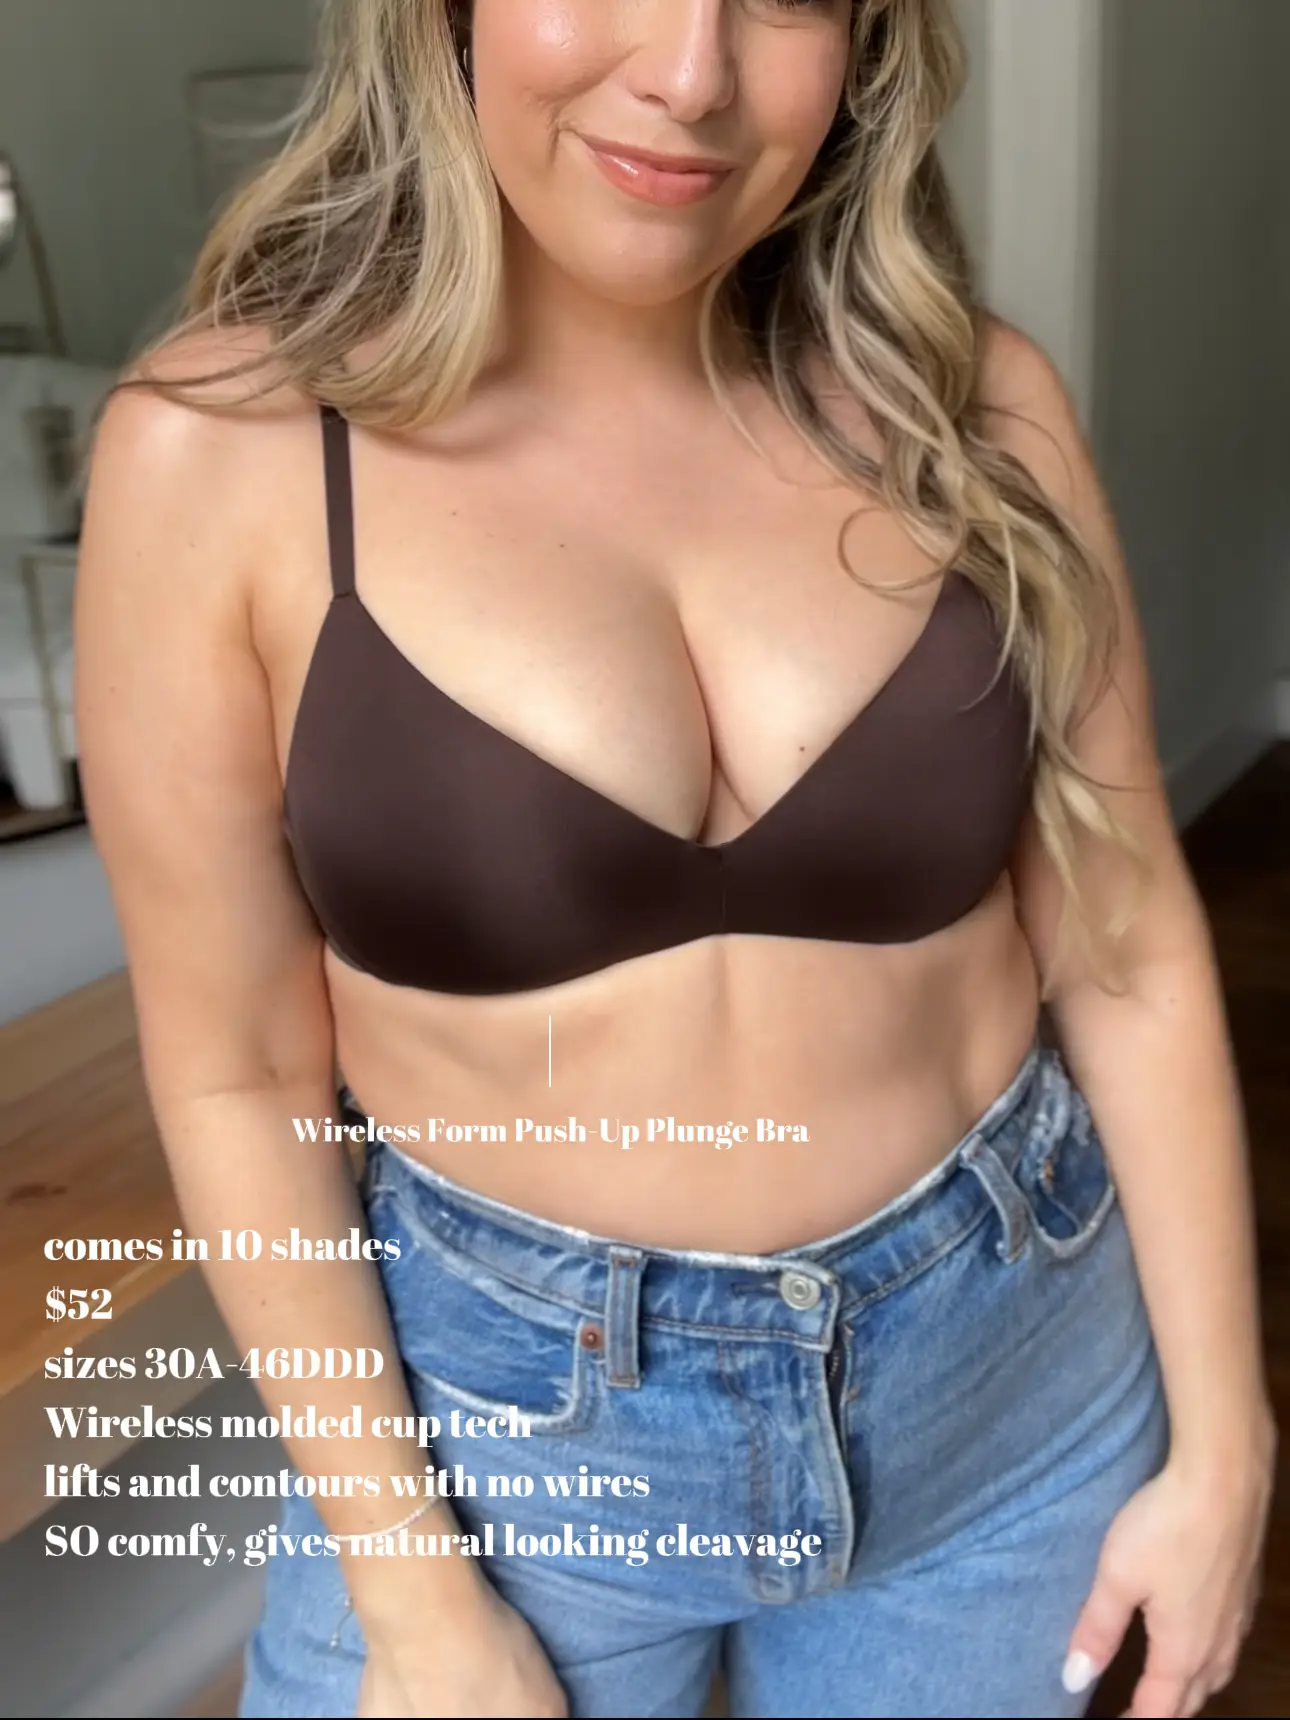 Best-Selling Skims Bras Review, Gallery posted by StephaniePernas